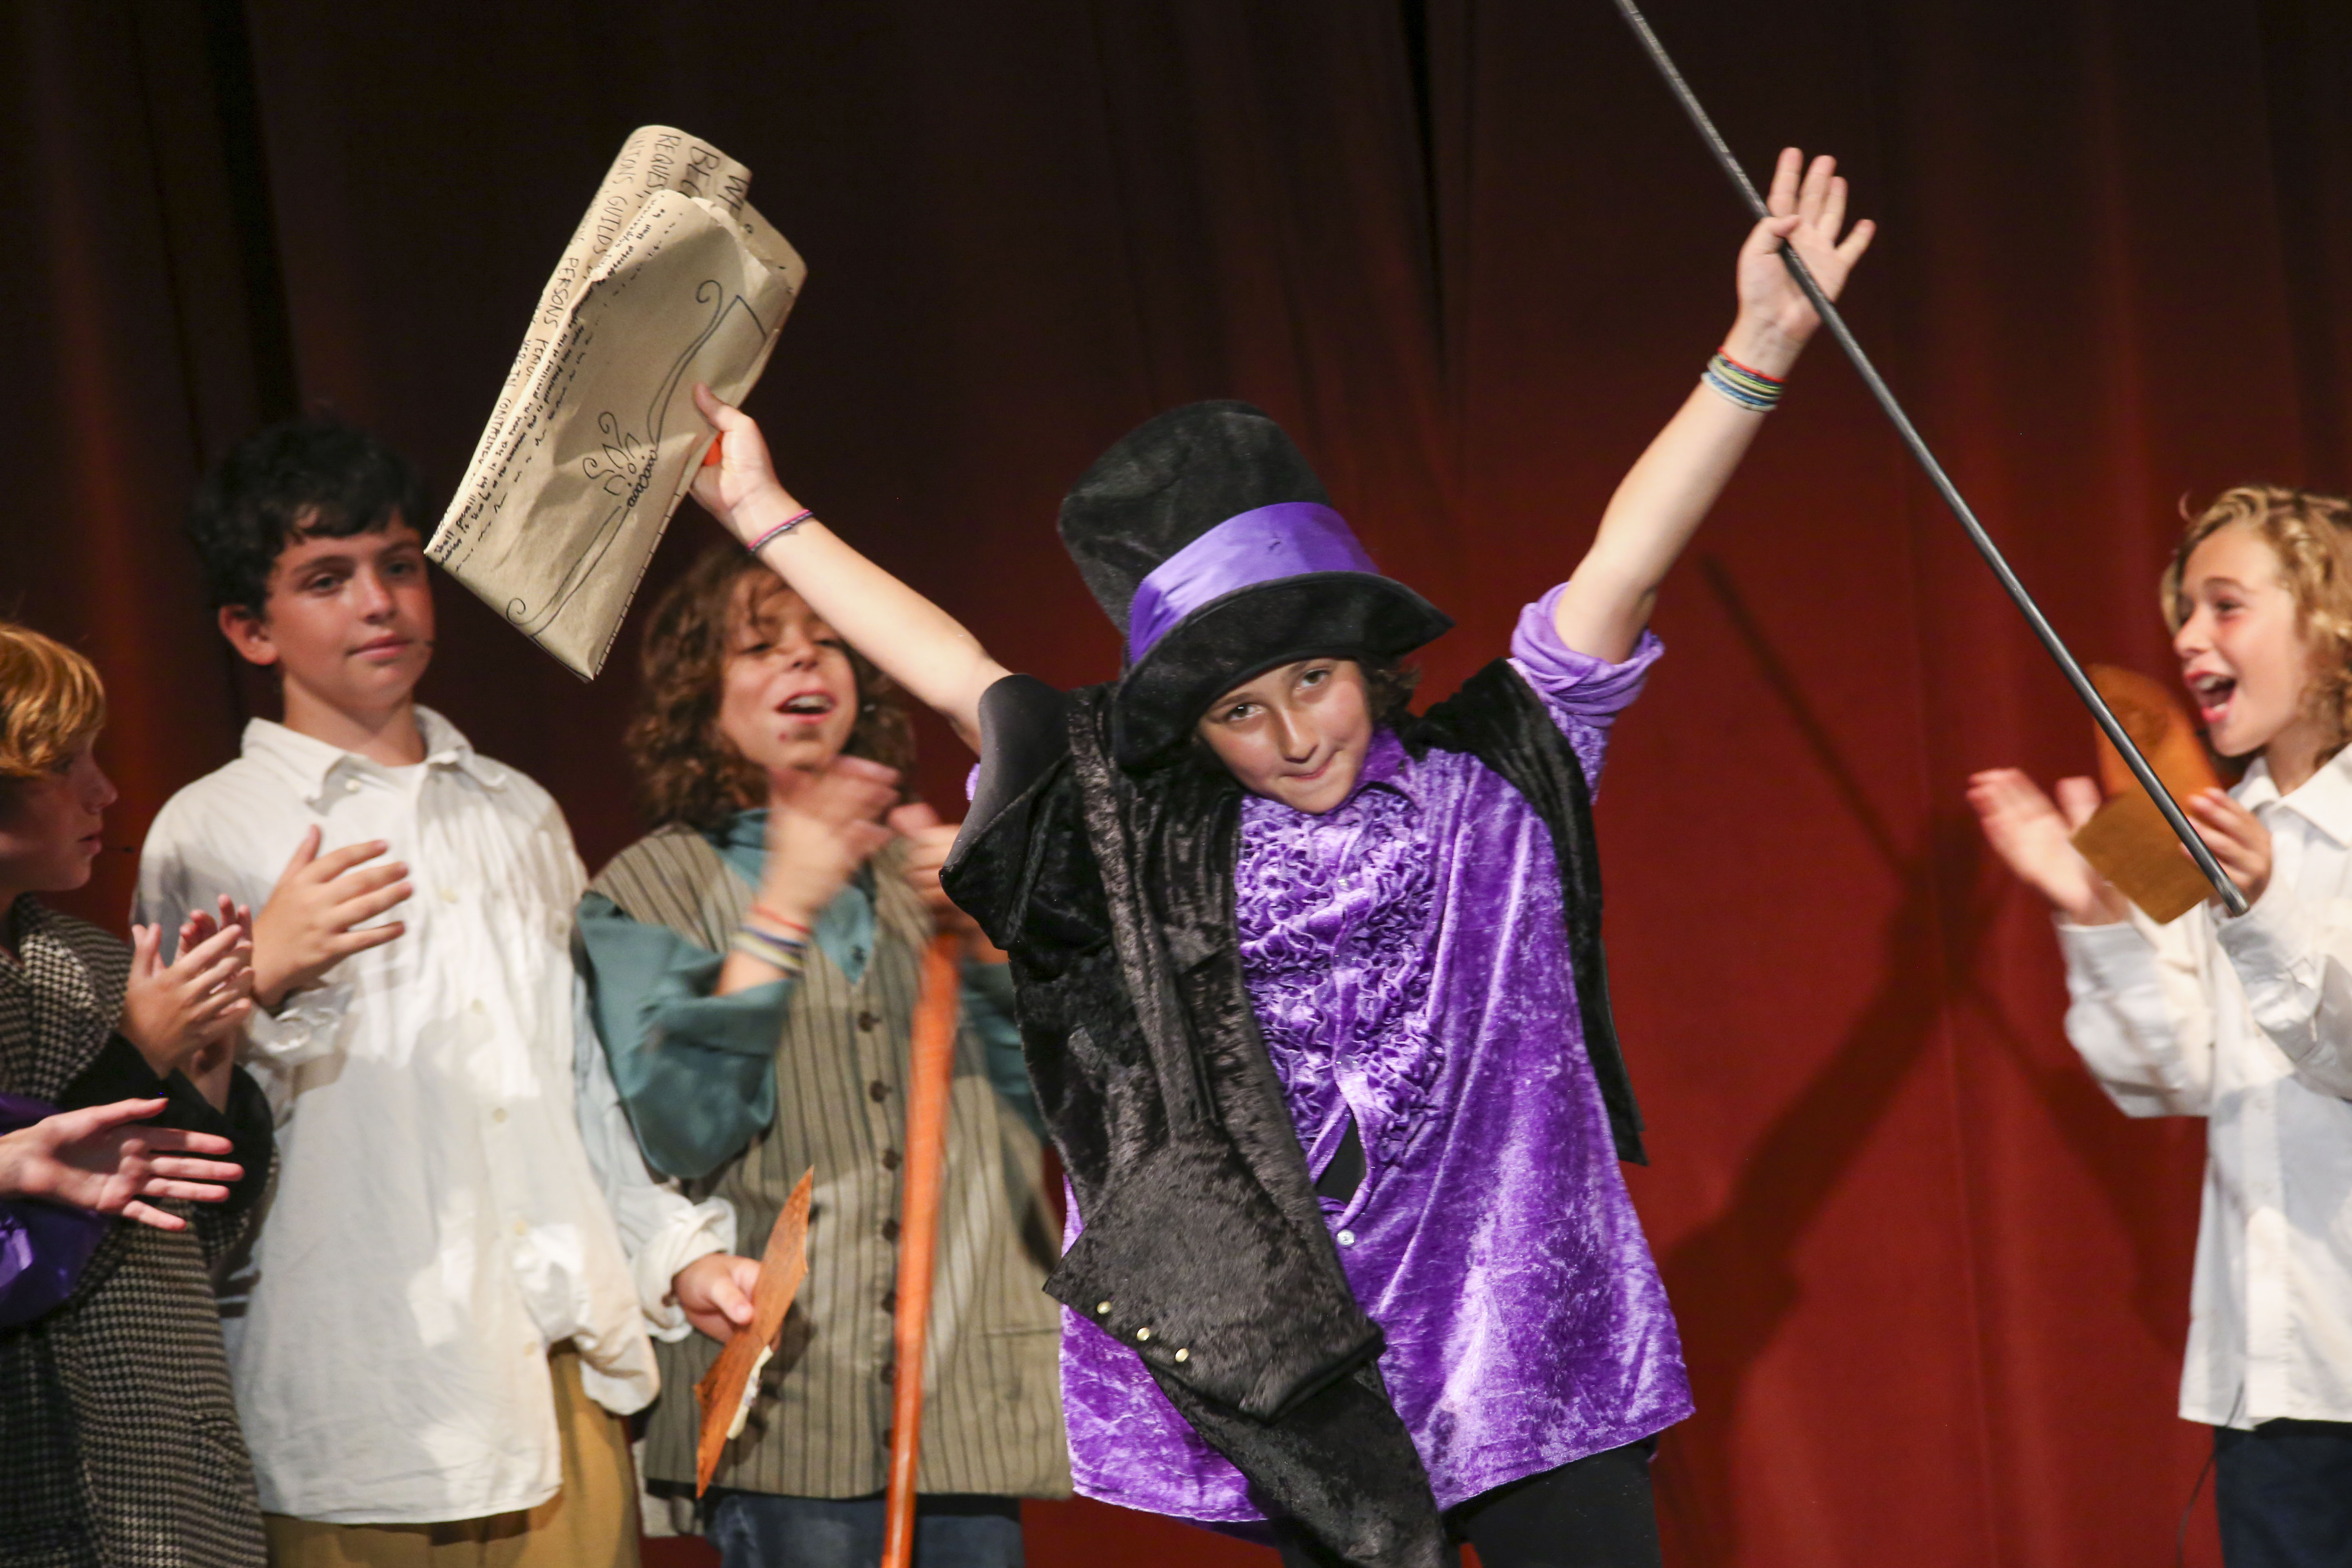 Devan as Willy Wonka in the stage performance of Charlie and the Chocolate Factory